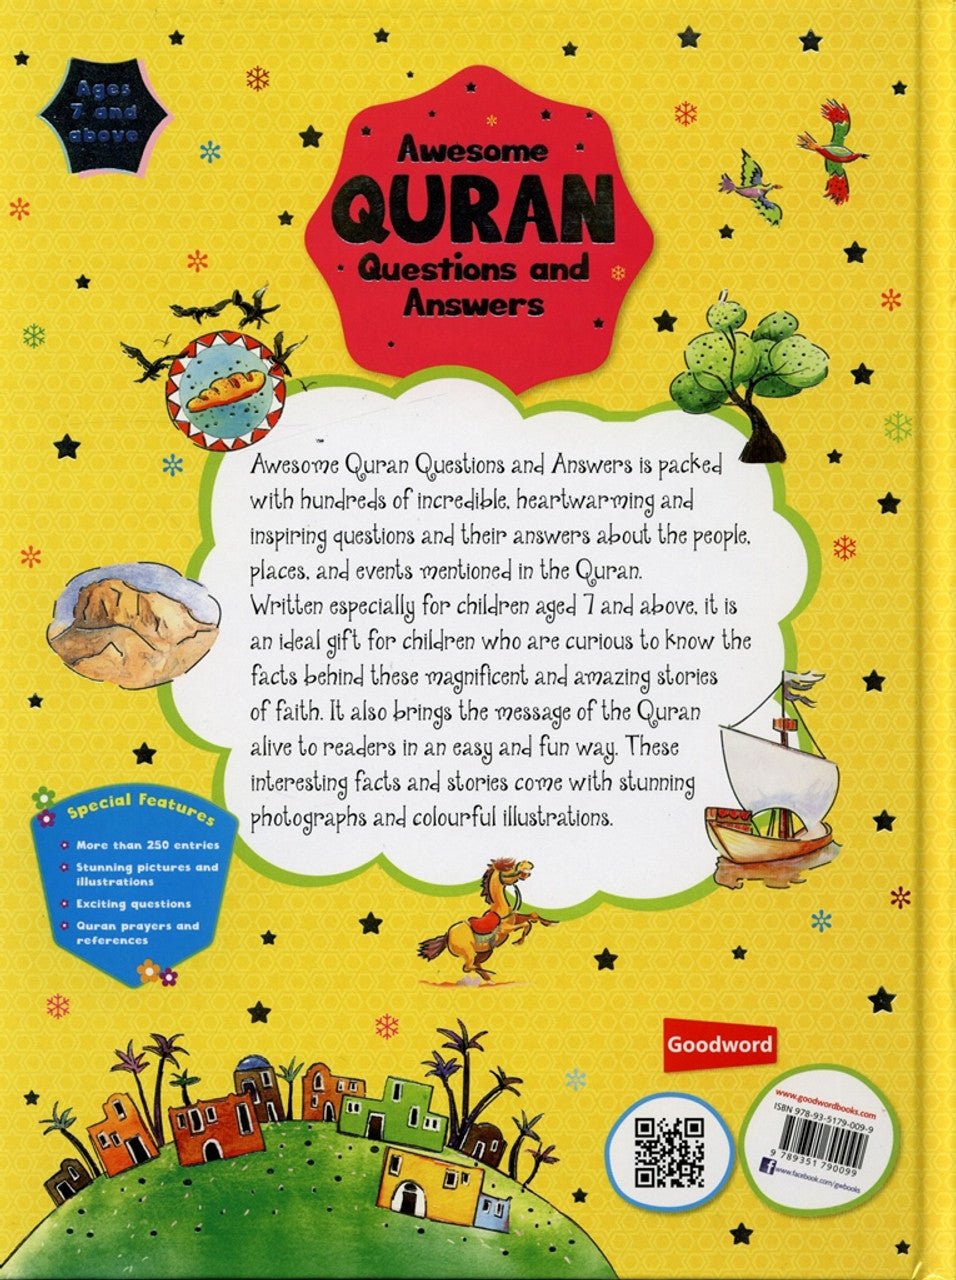 Awesome Quran Questions and Answers for Curious Minds